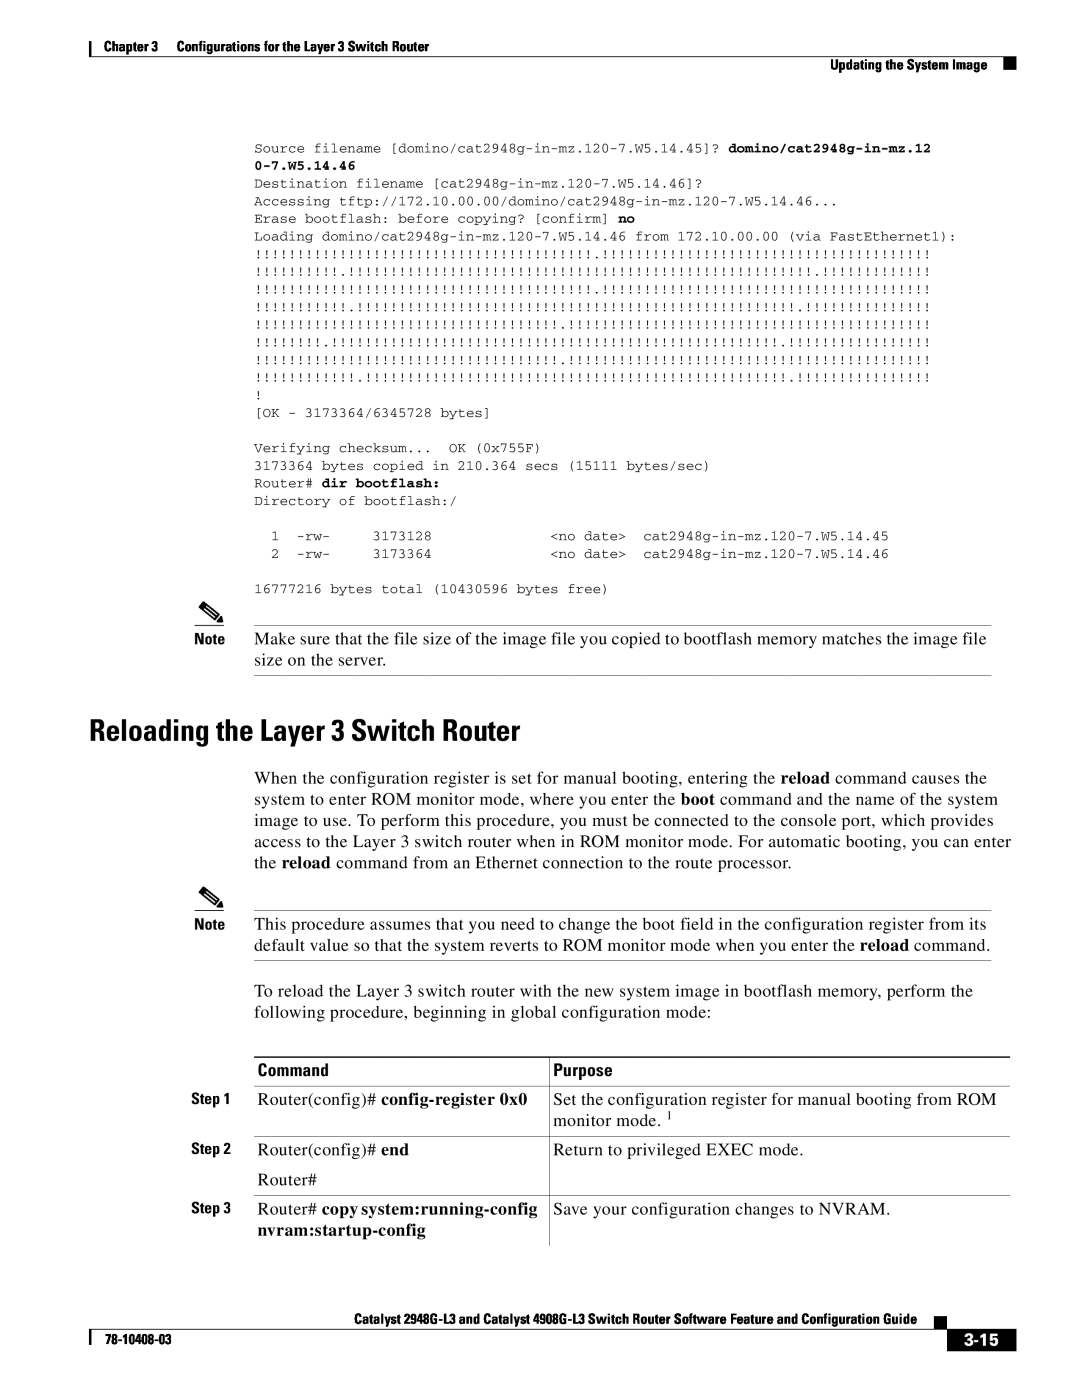 Cisco Systems 2948G-L3 manual Reloading the Layer 3 Switch Router, Routerconfig# config-register, nvramstartup-config, 3-15 